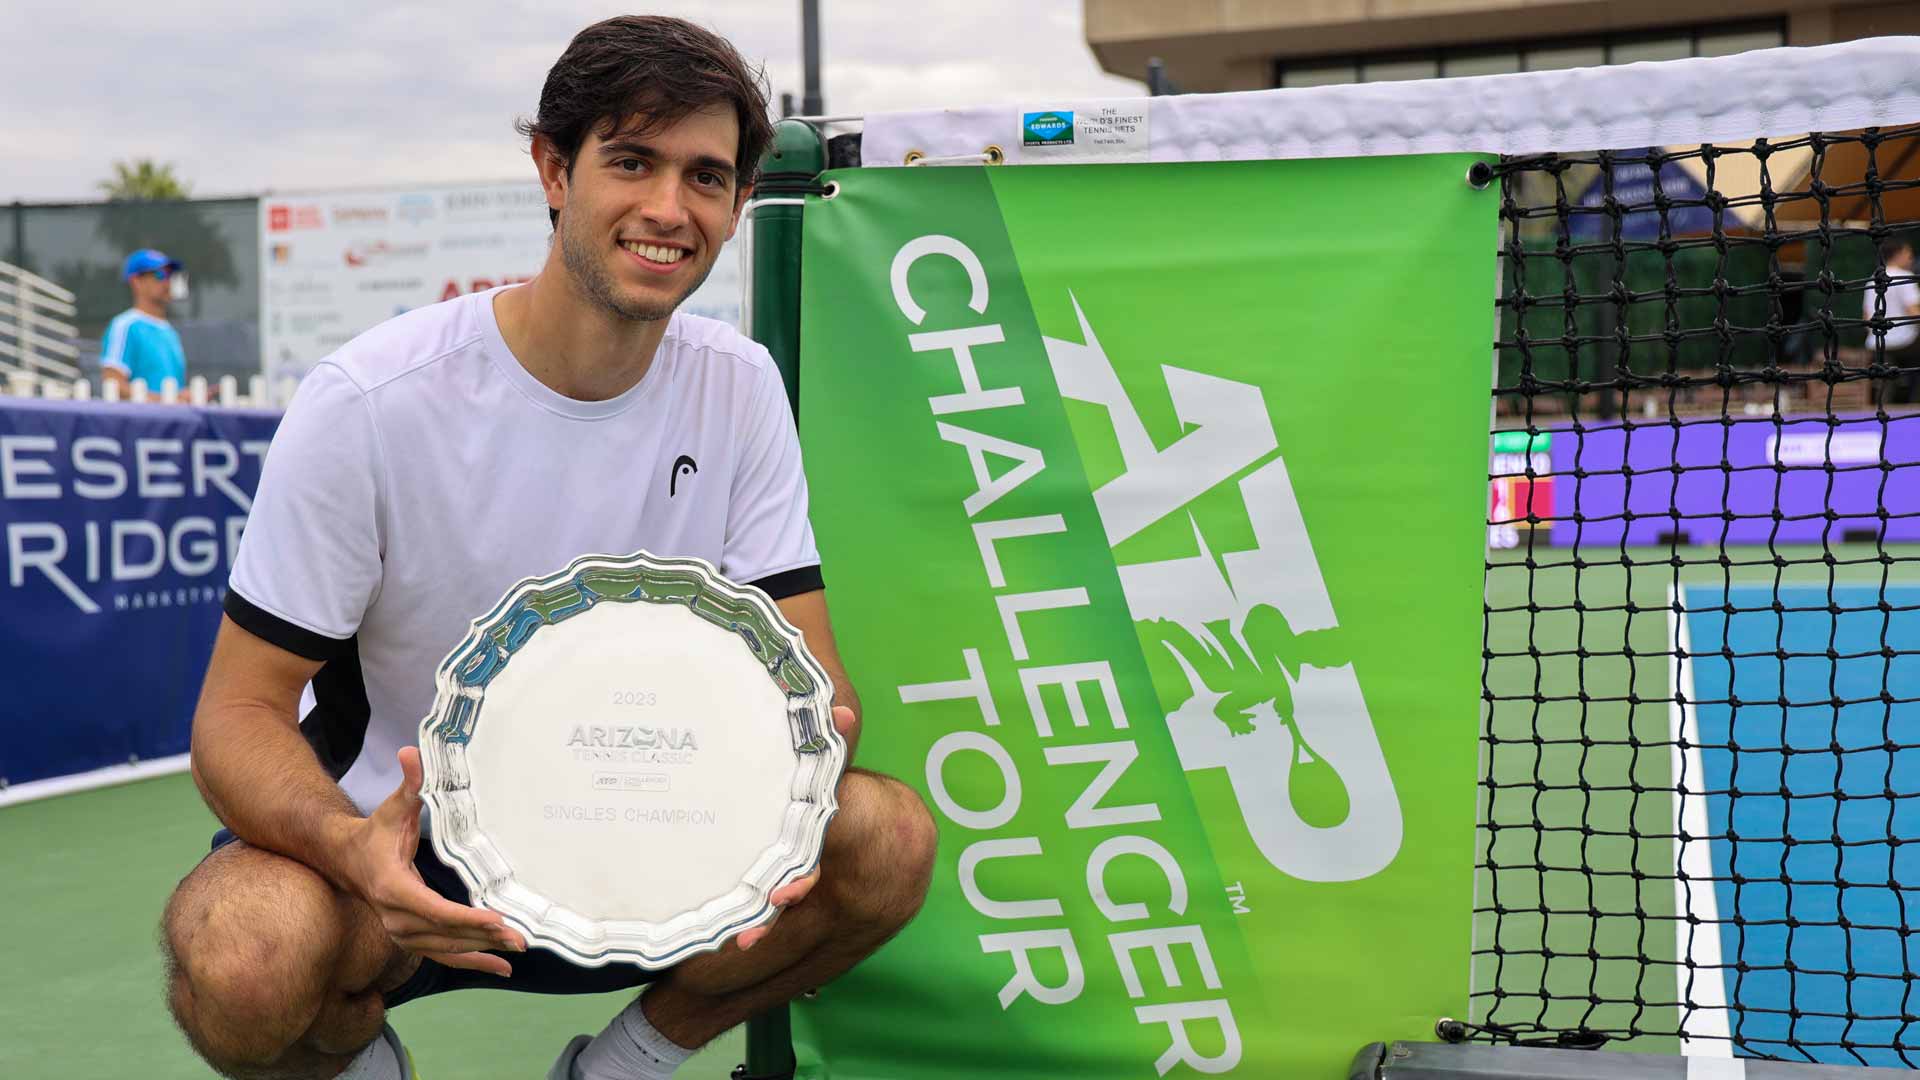 Nuno Borges is crowned champion at the premiere Challenger 175 event in Phoenix, Arizona.